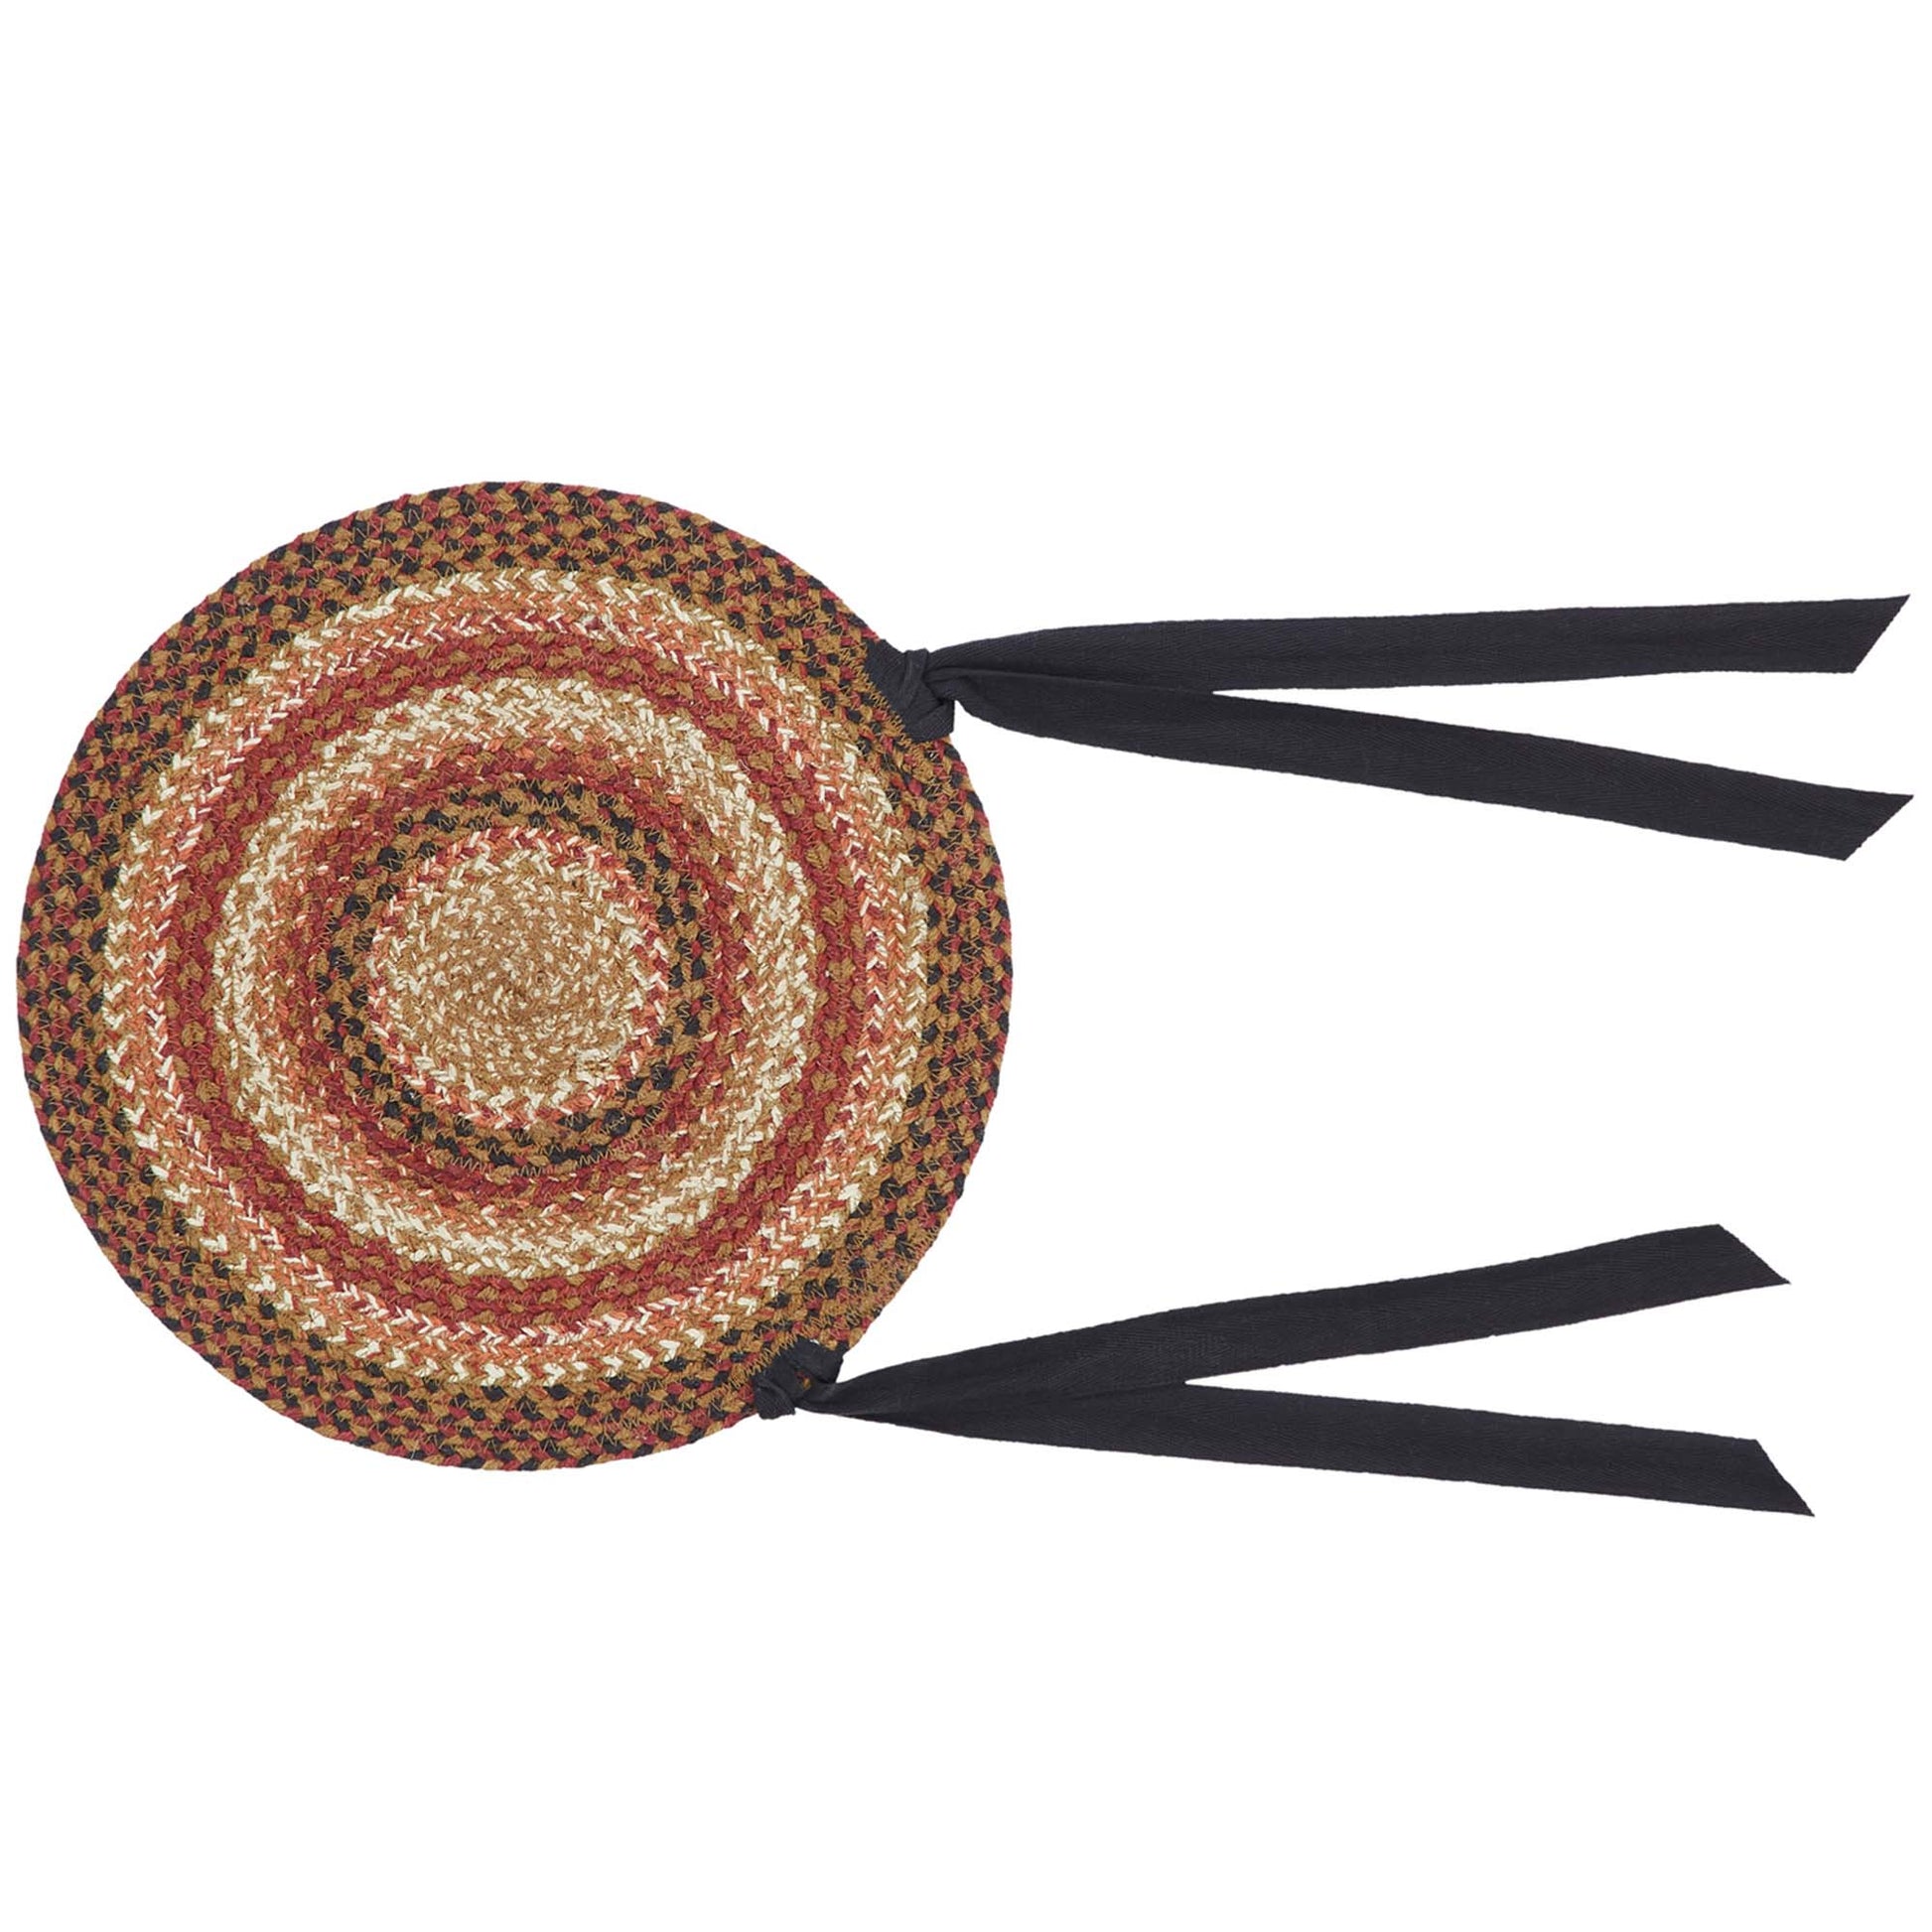 67127-Ginger-Spice-Jute-Chair-Pad-15-inch-Diameter-image-4